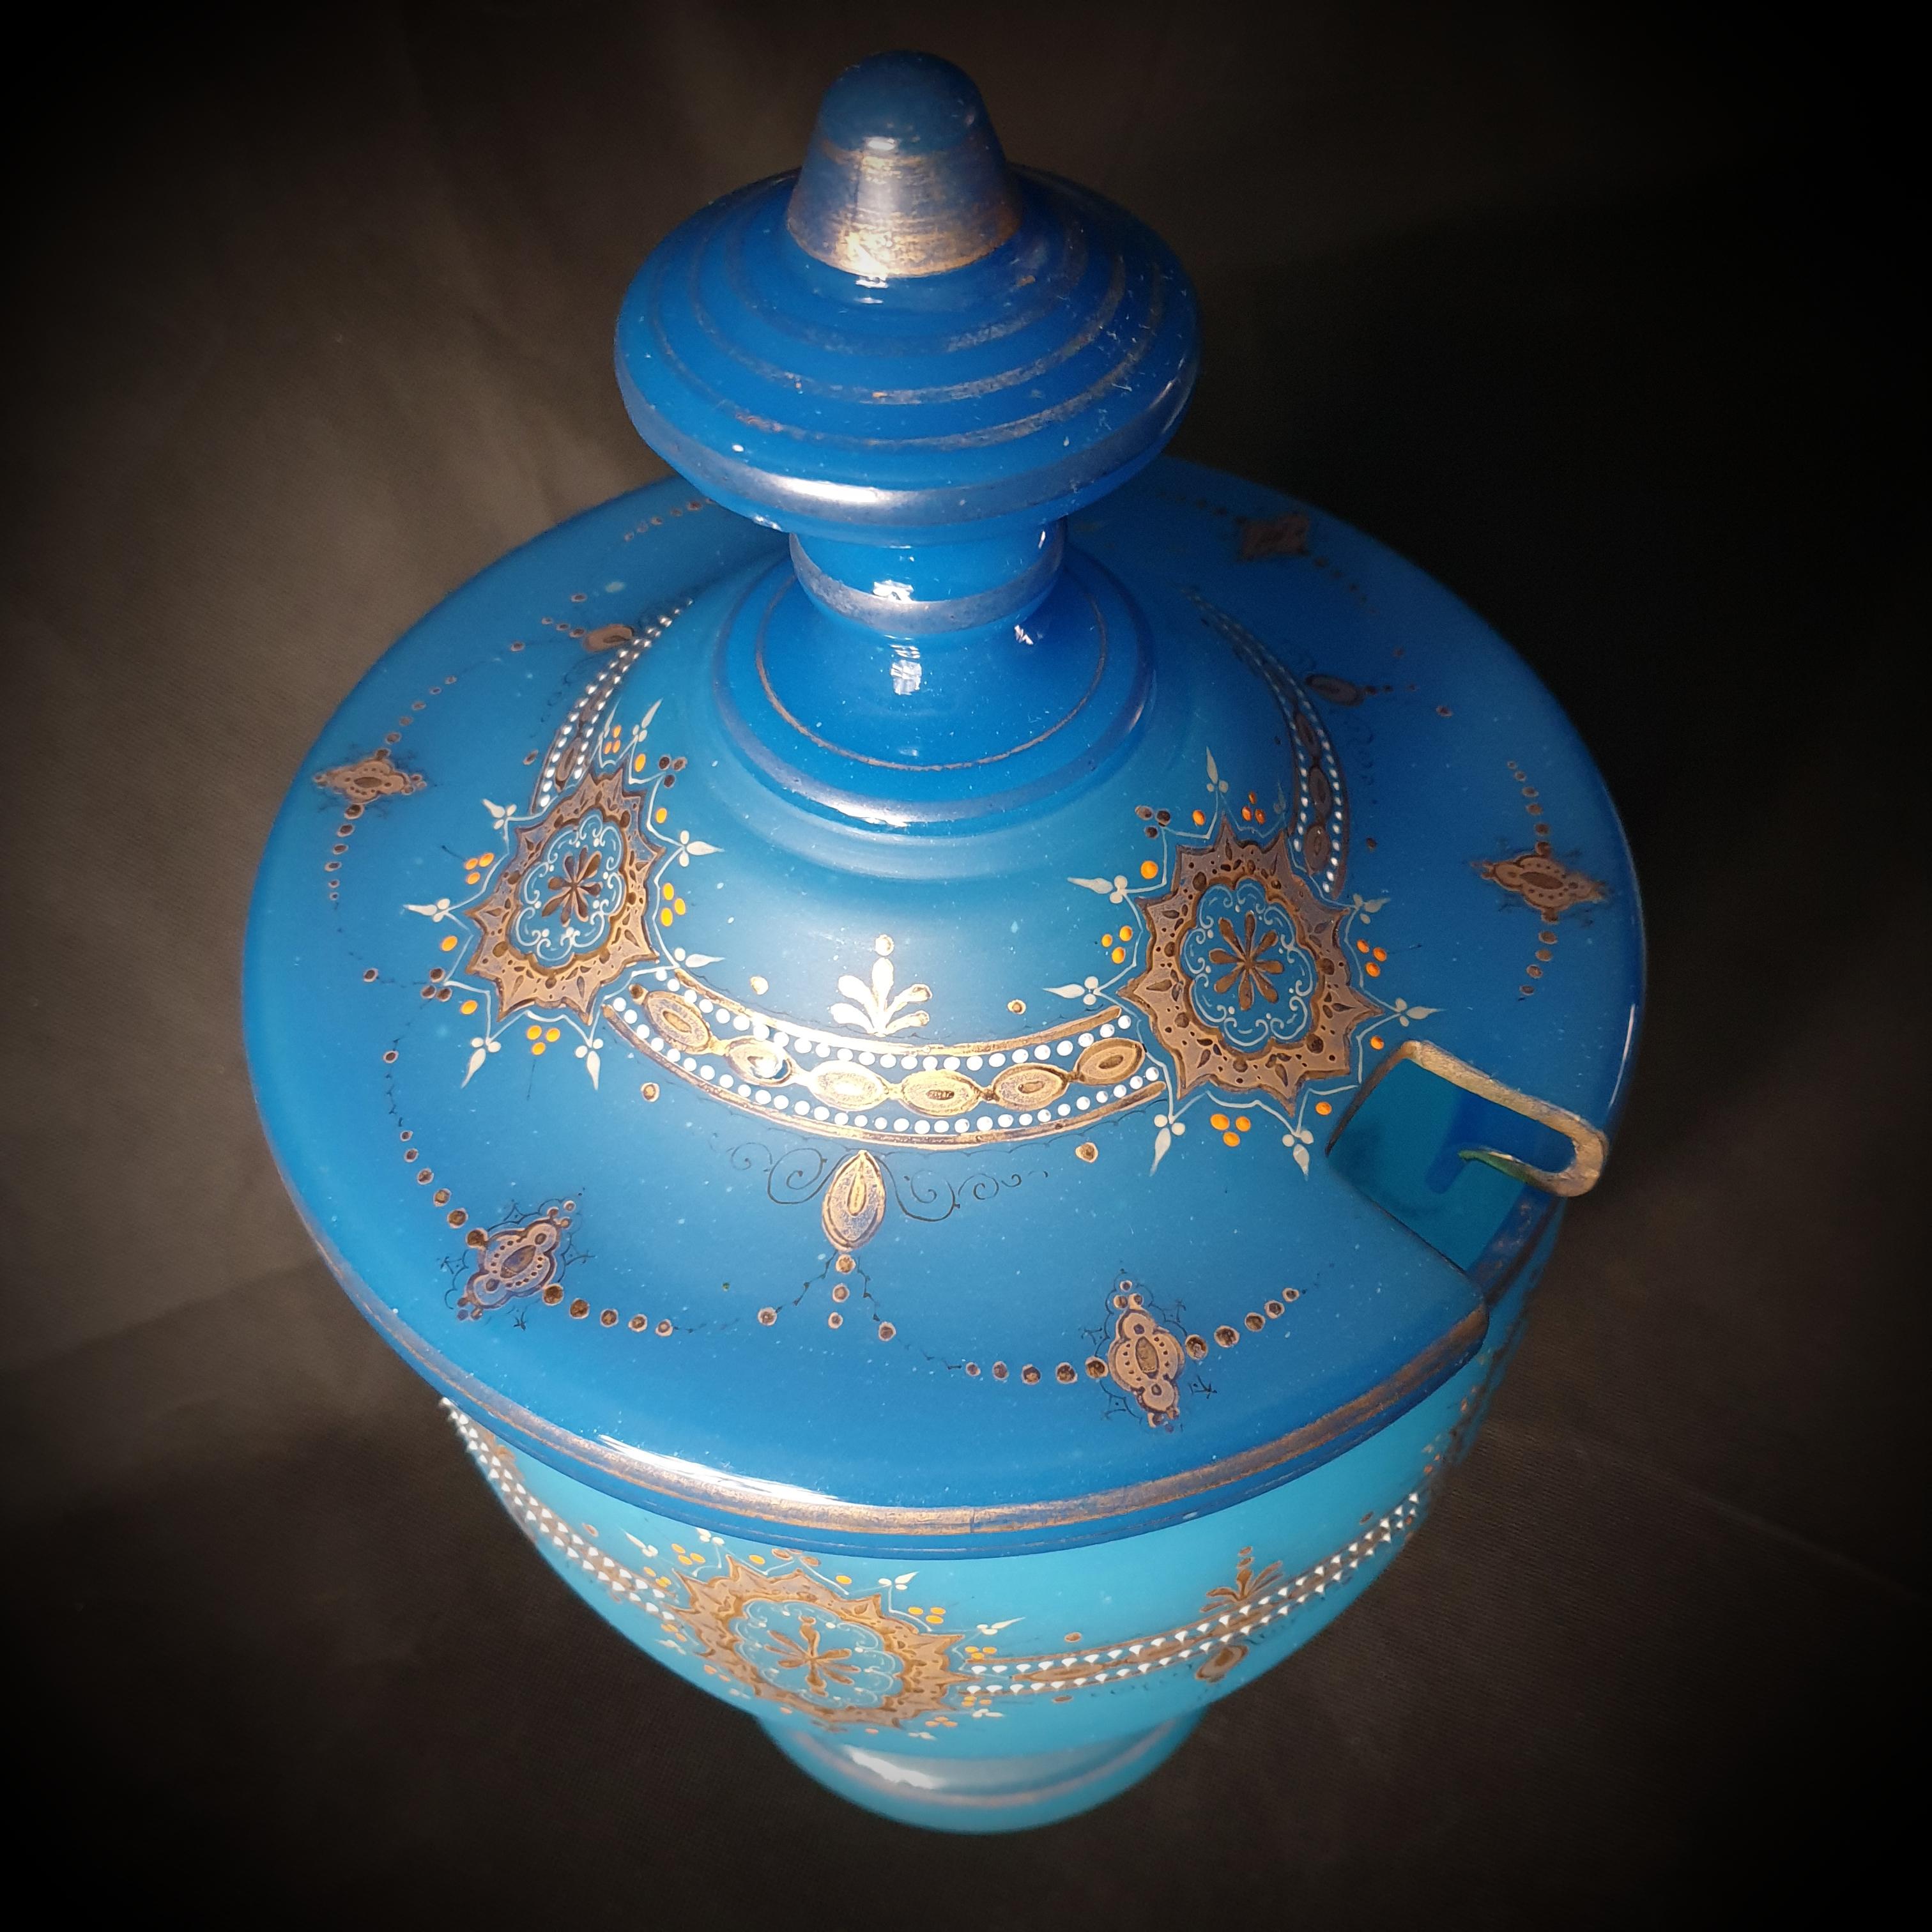 Are you looking for a good discussion starter for your living room or lobby? Instead of searching elsewhere, consider this lovely Moser blue urn.
This urn, created in France between 1850 and 1920, is an excellent example of why French workmanship is